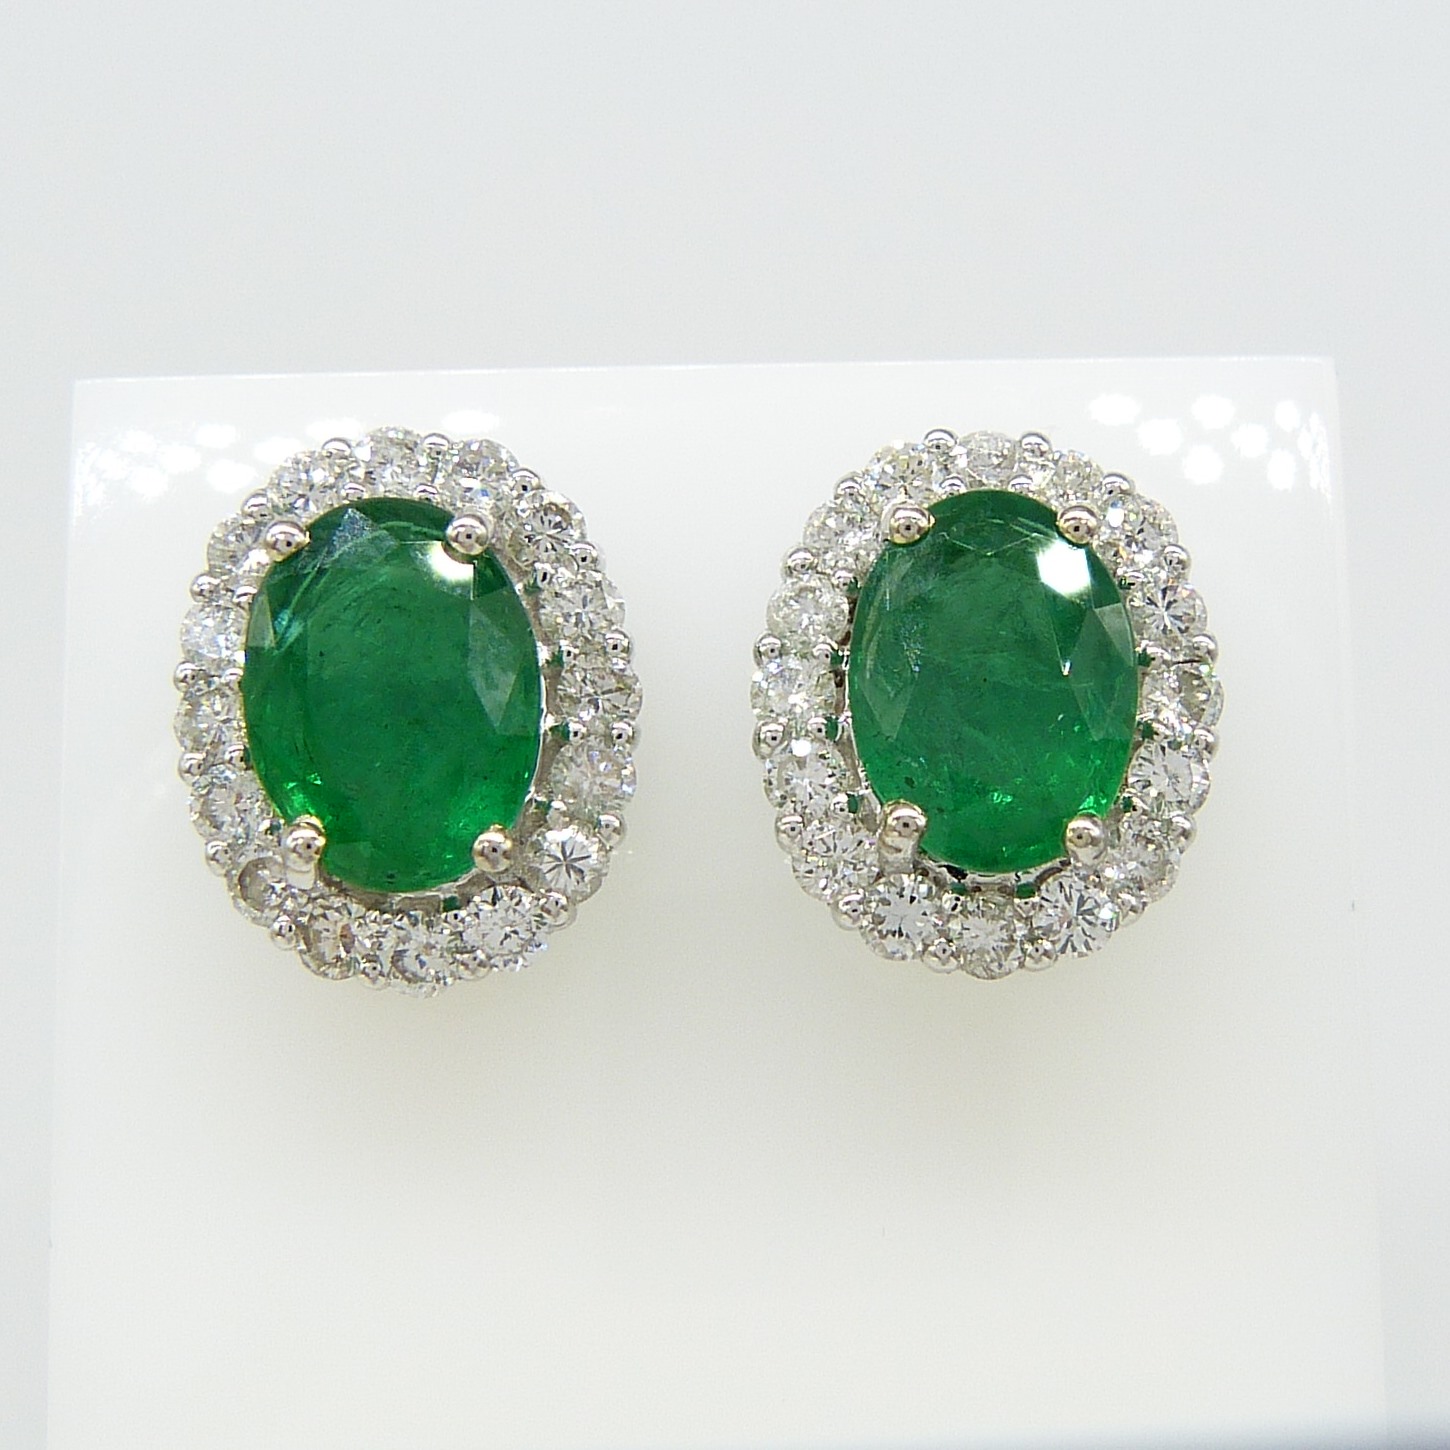 Pair of 18ct white gold 2.48 carat emerald and diamond halo ear studs, boxed